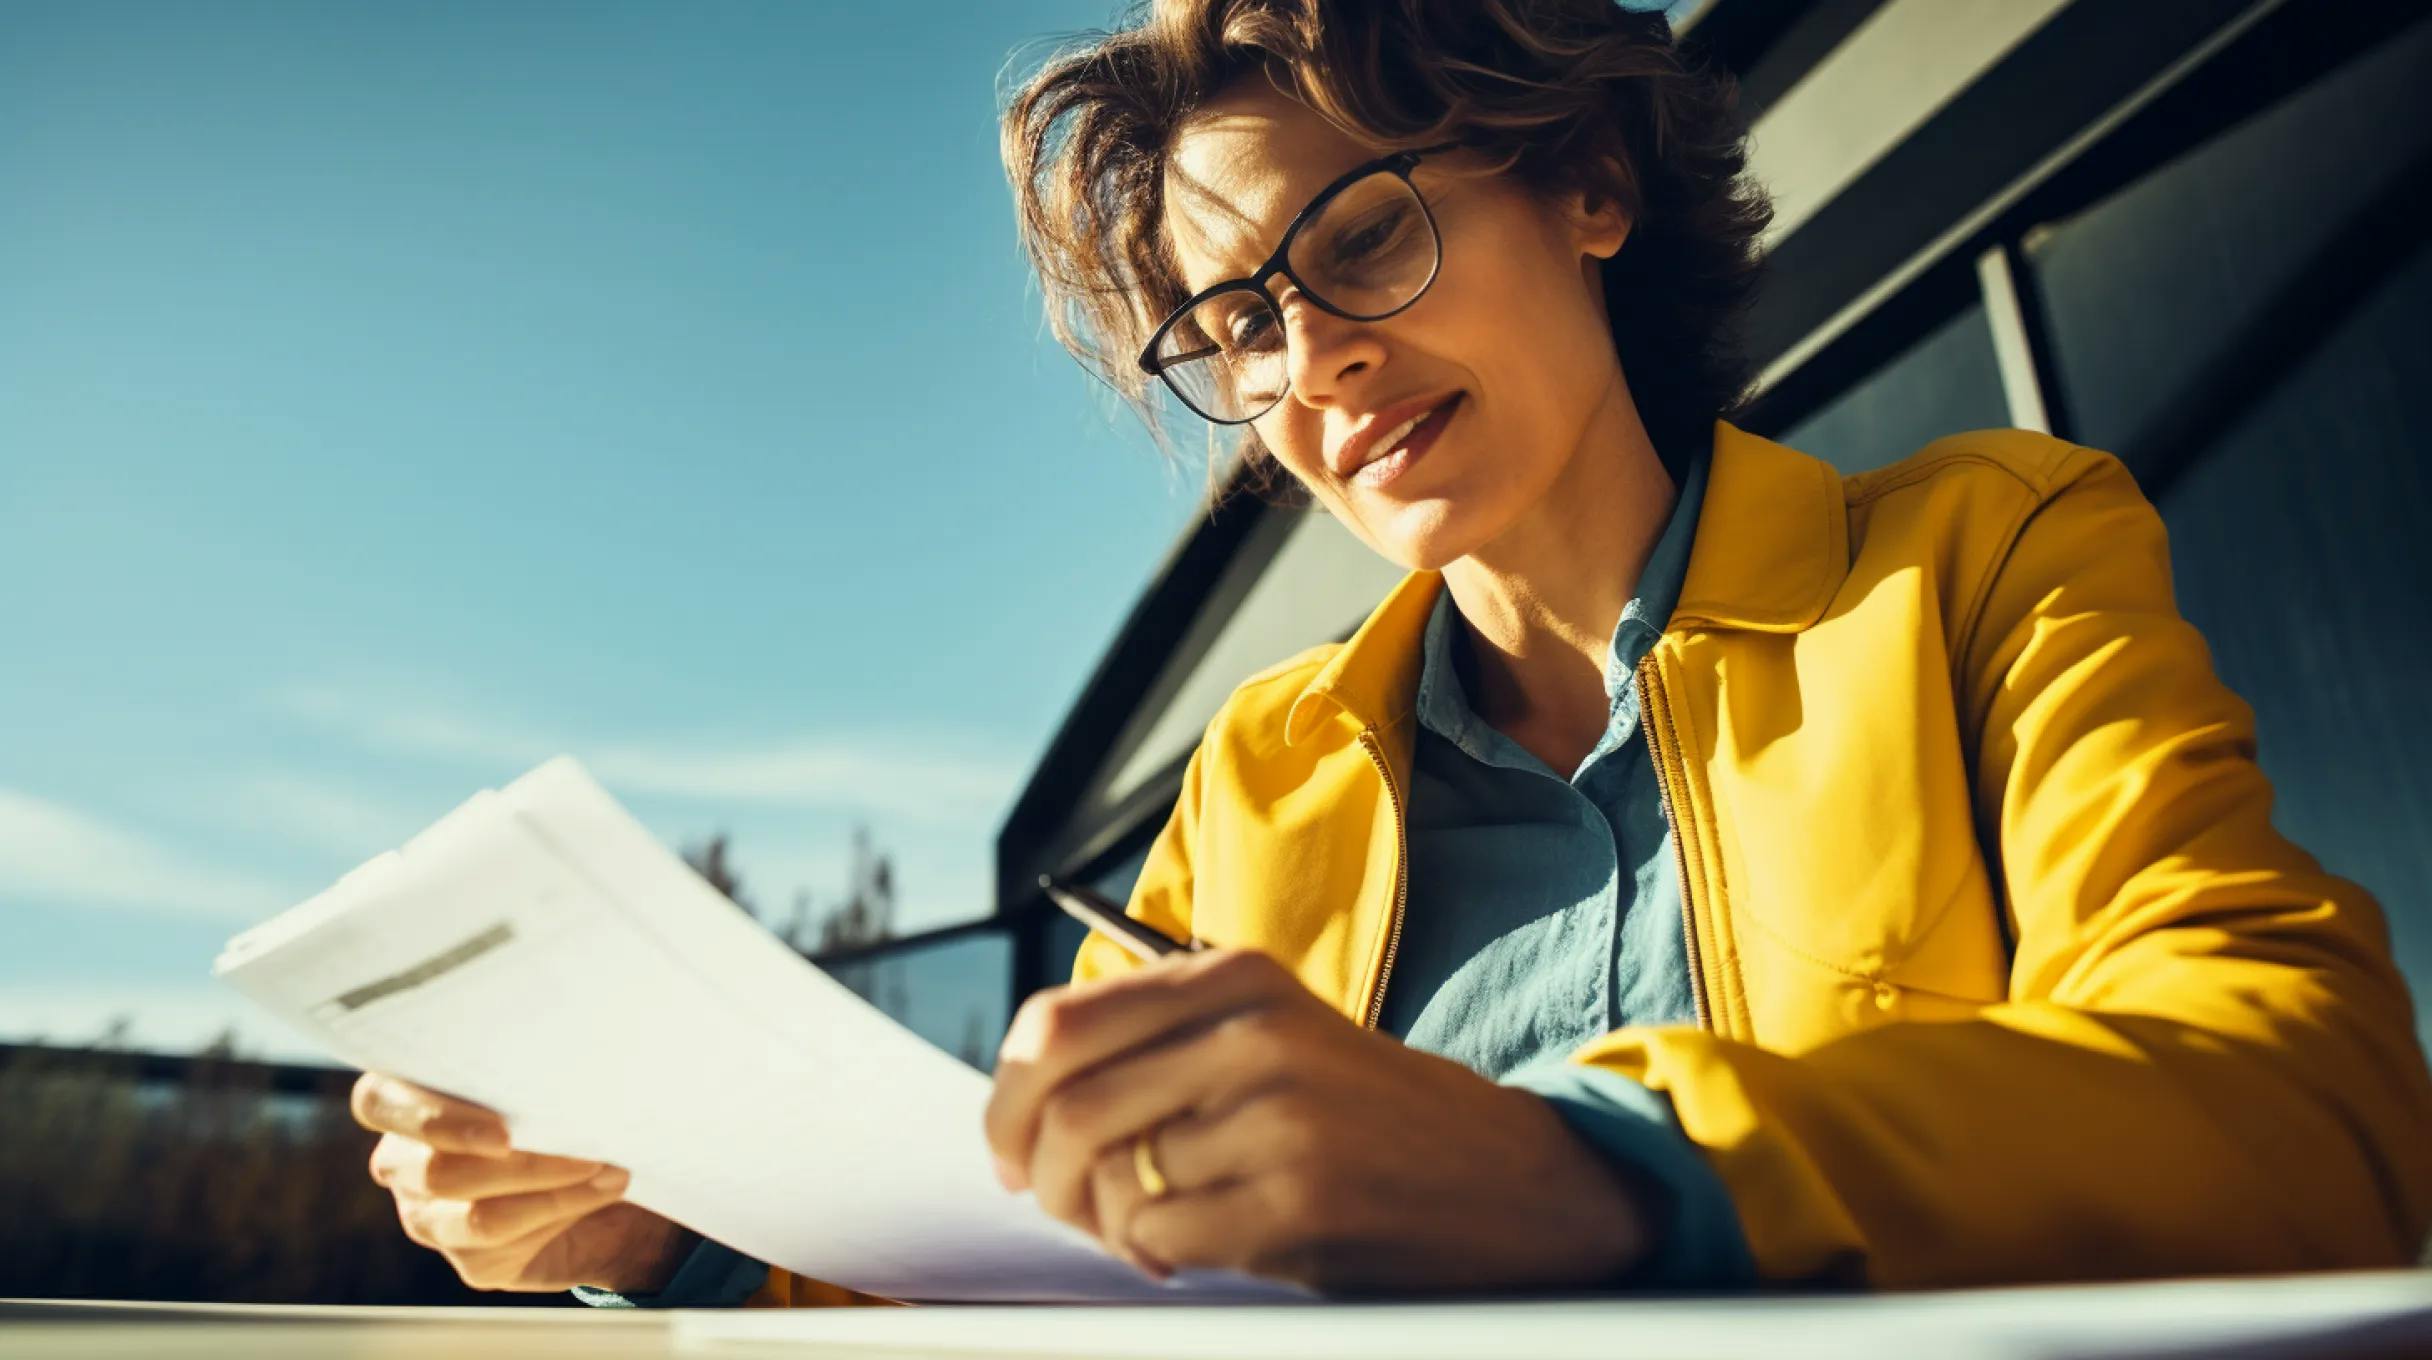 A woman wearing glasses is focused on reading a document, displaying attentiveness and concentration.